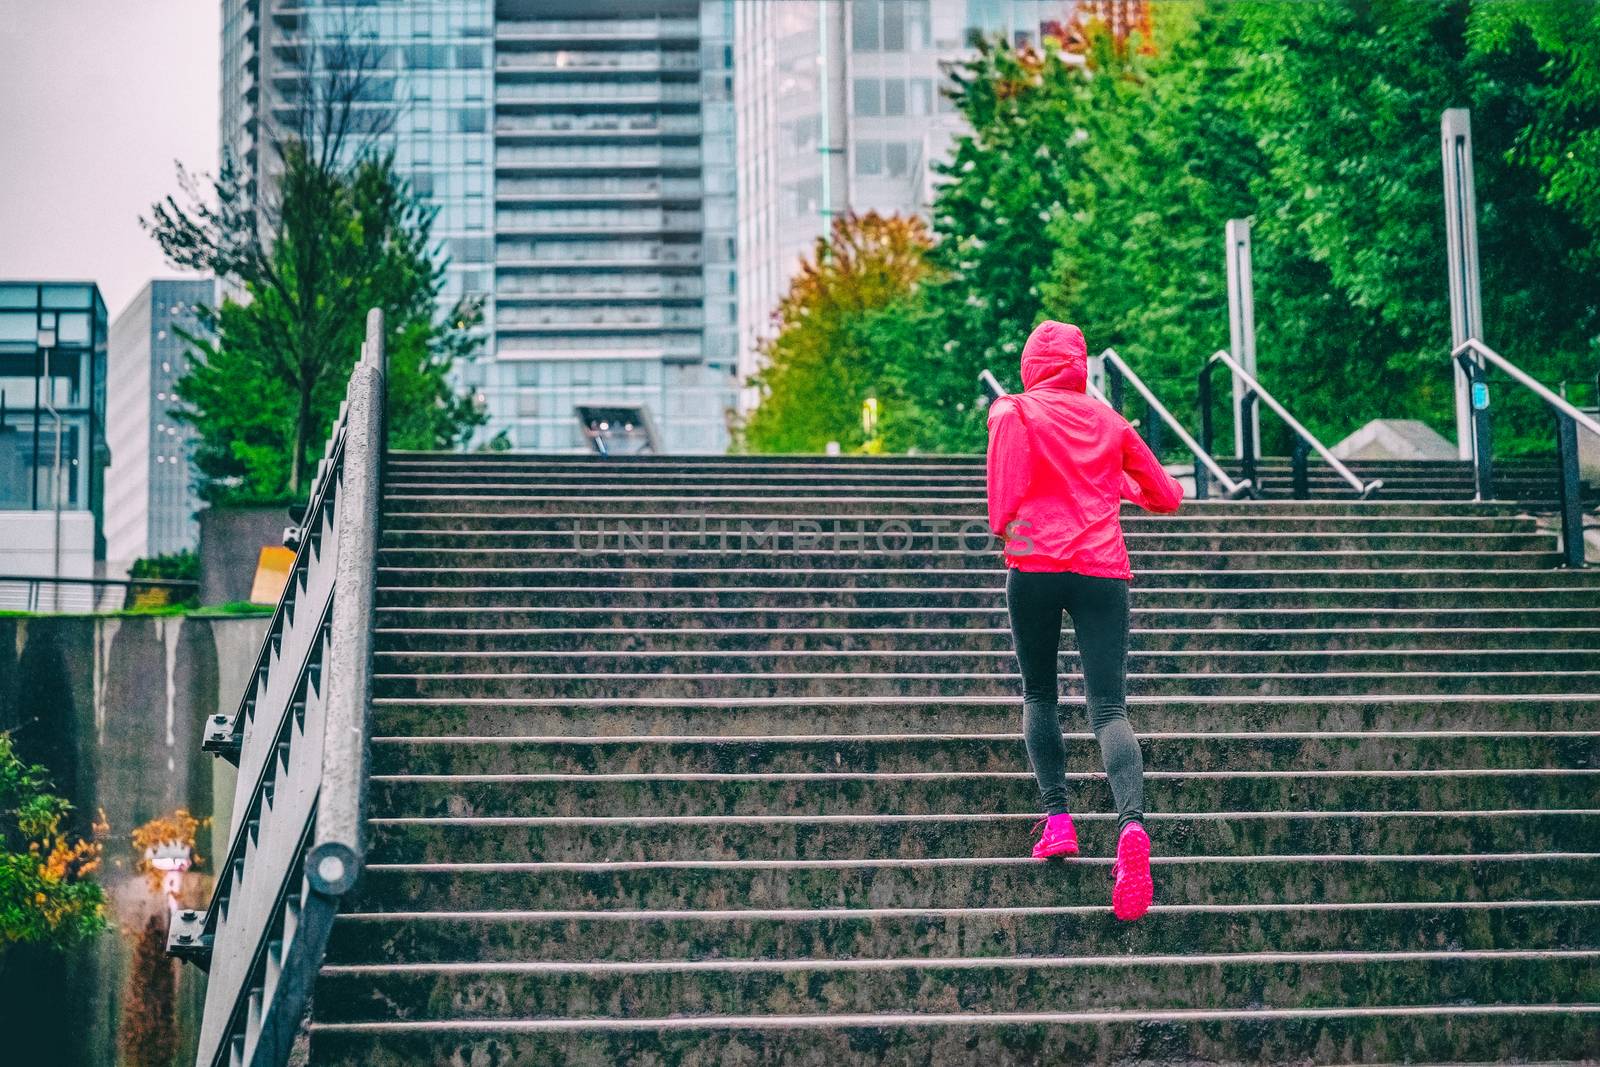 Runner running up the stairs on rain run in Vancouver city. Staircase cardio workout jogger training by Maridav